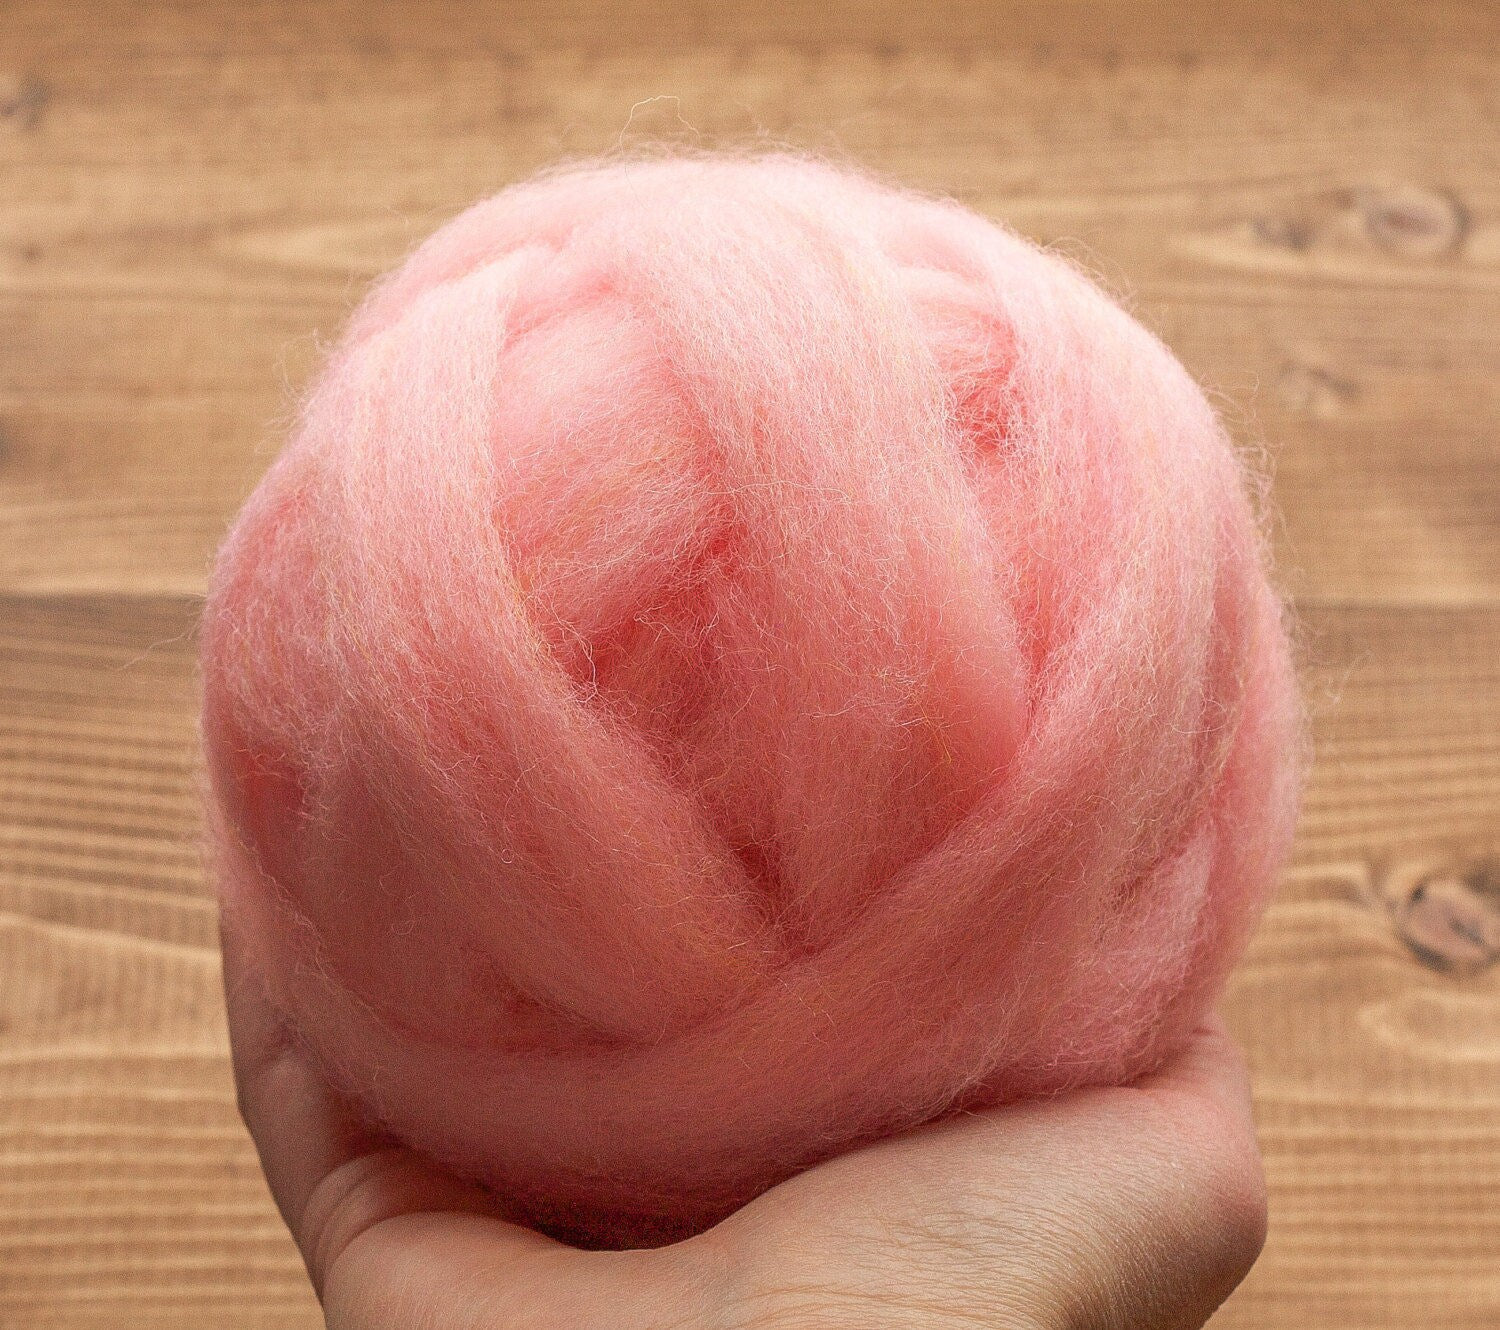 Apricot Wool Roving for Needle Felting, Wet Felting, and Weaving